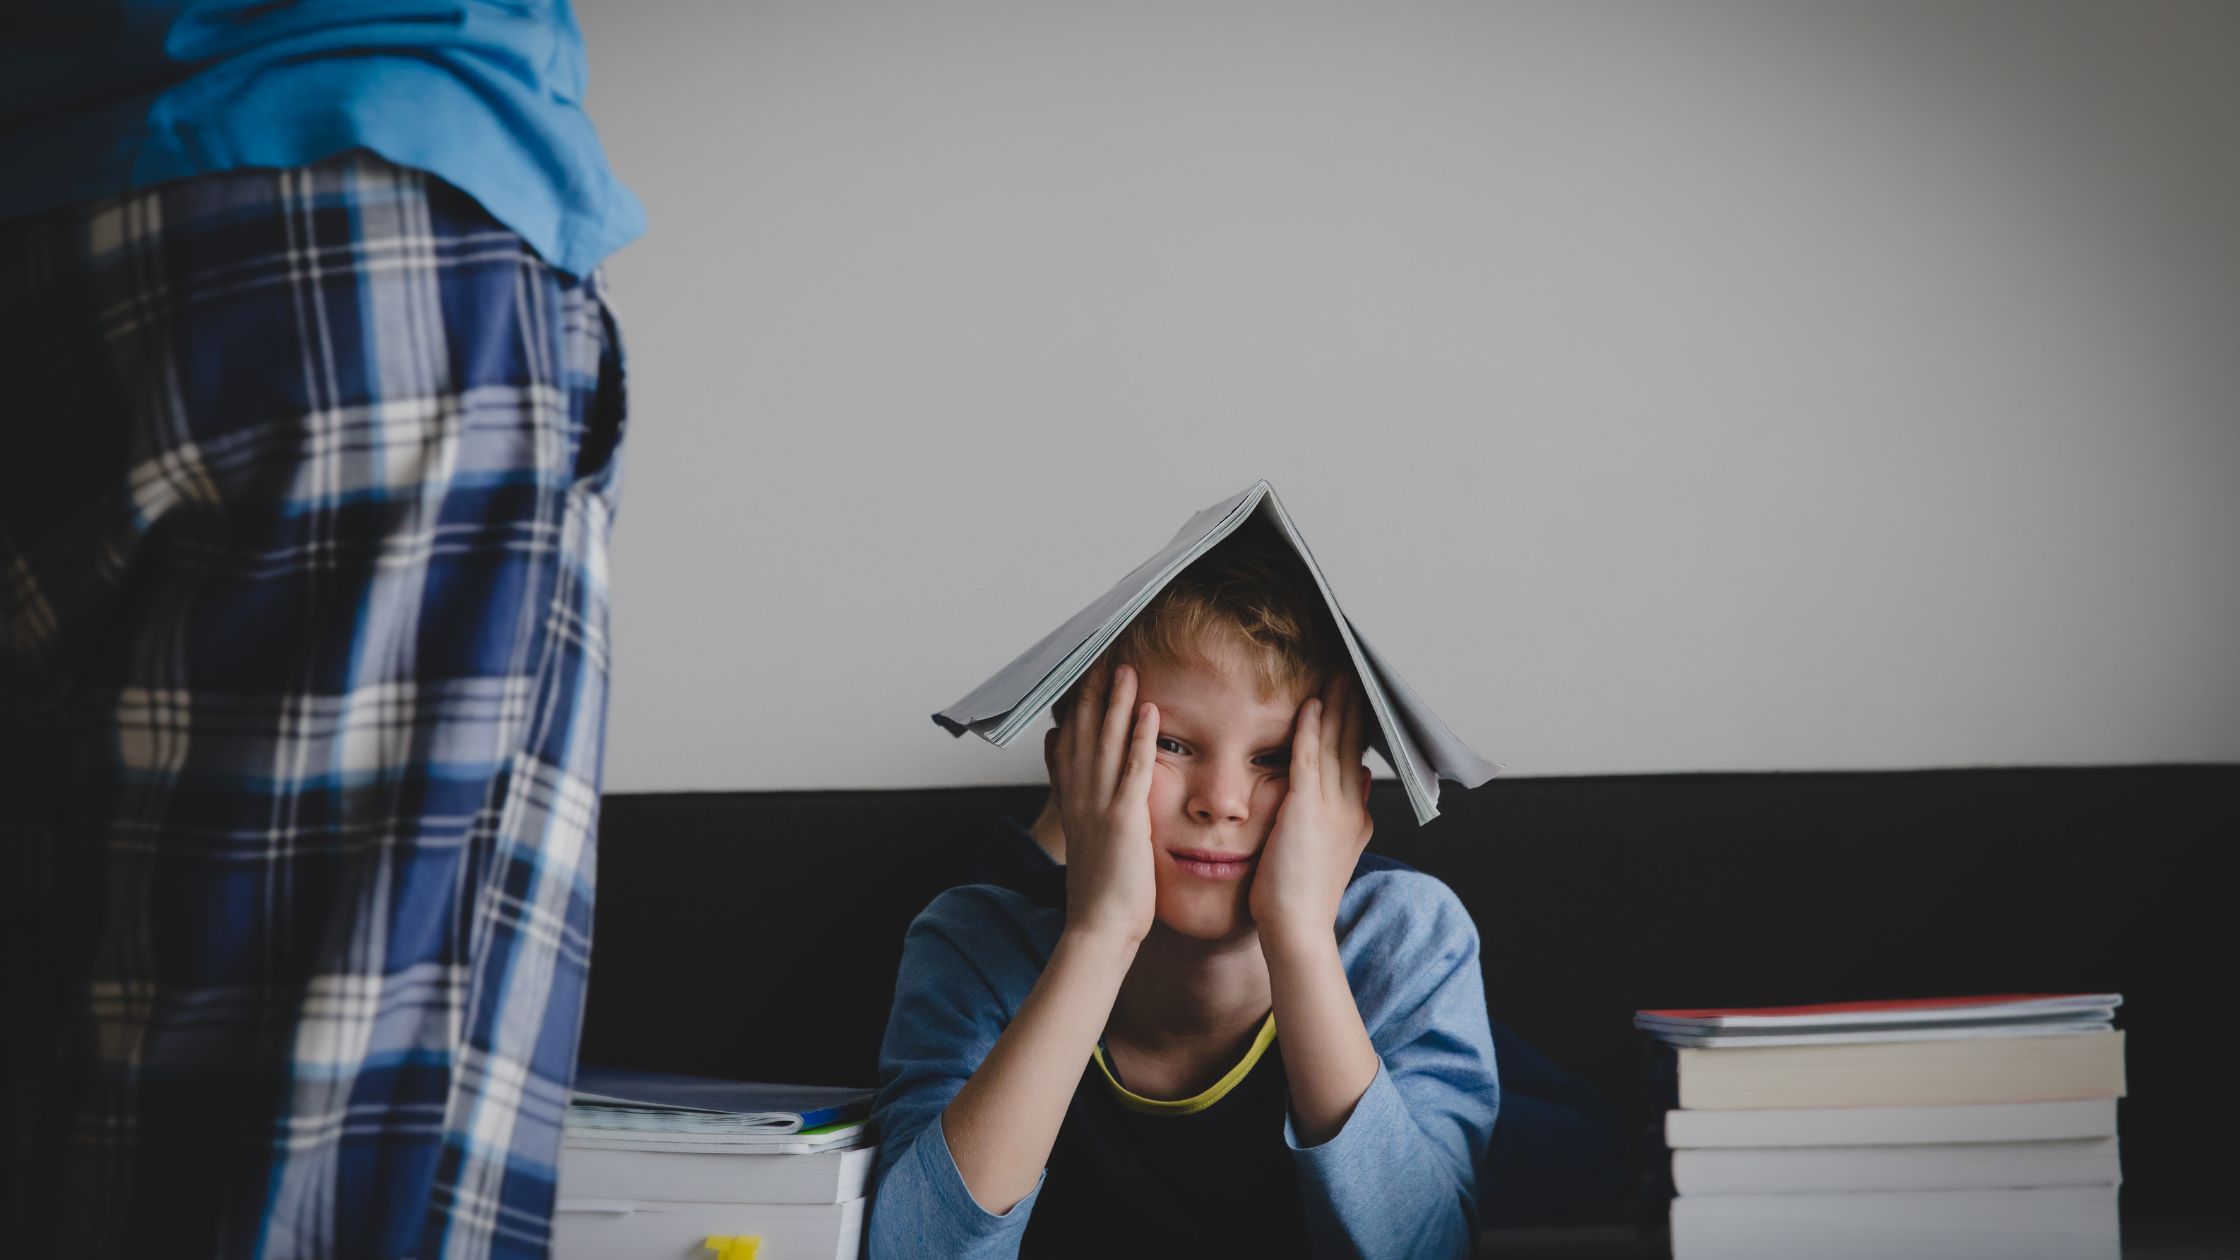 Homework Harmony: The Art of Stress-Free After-School Routines